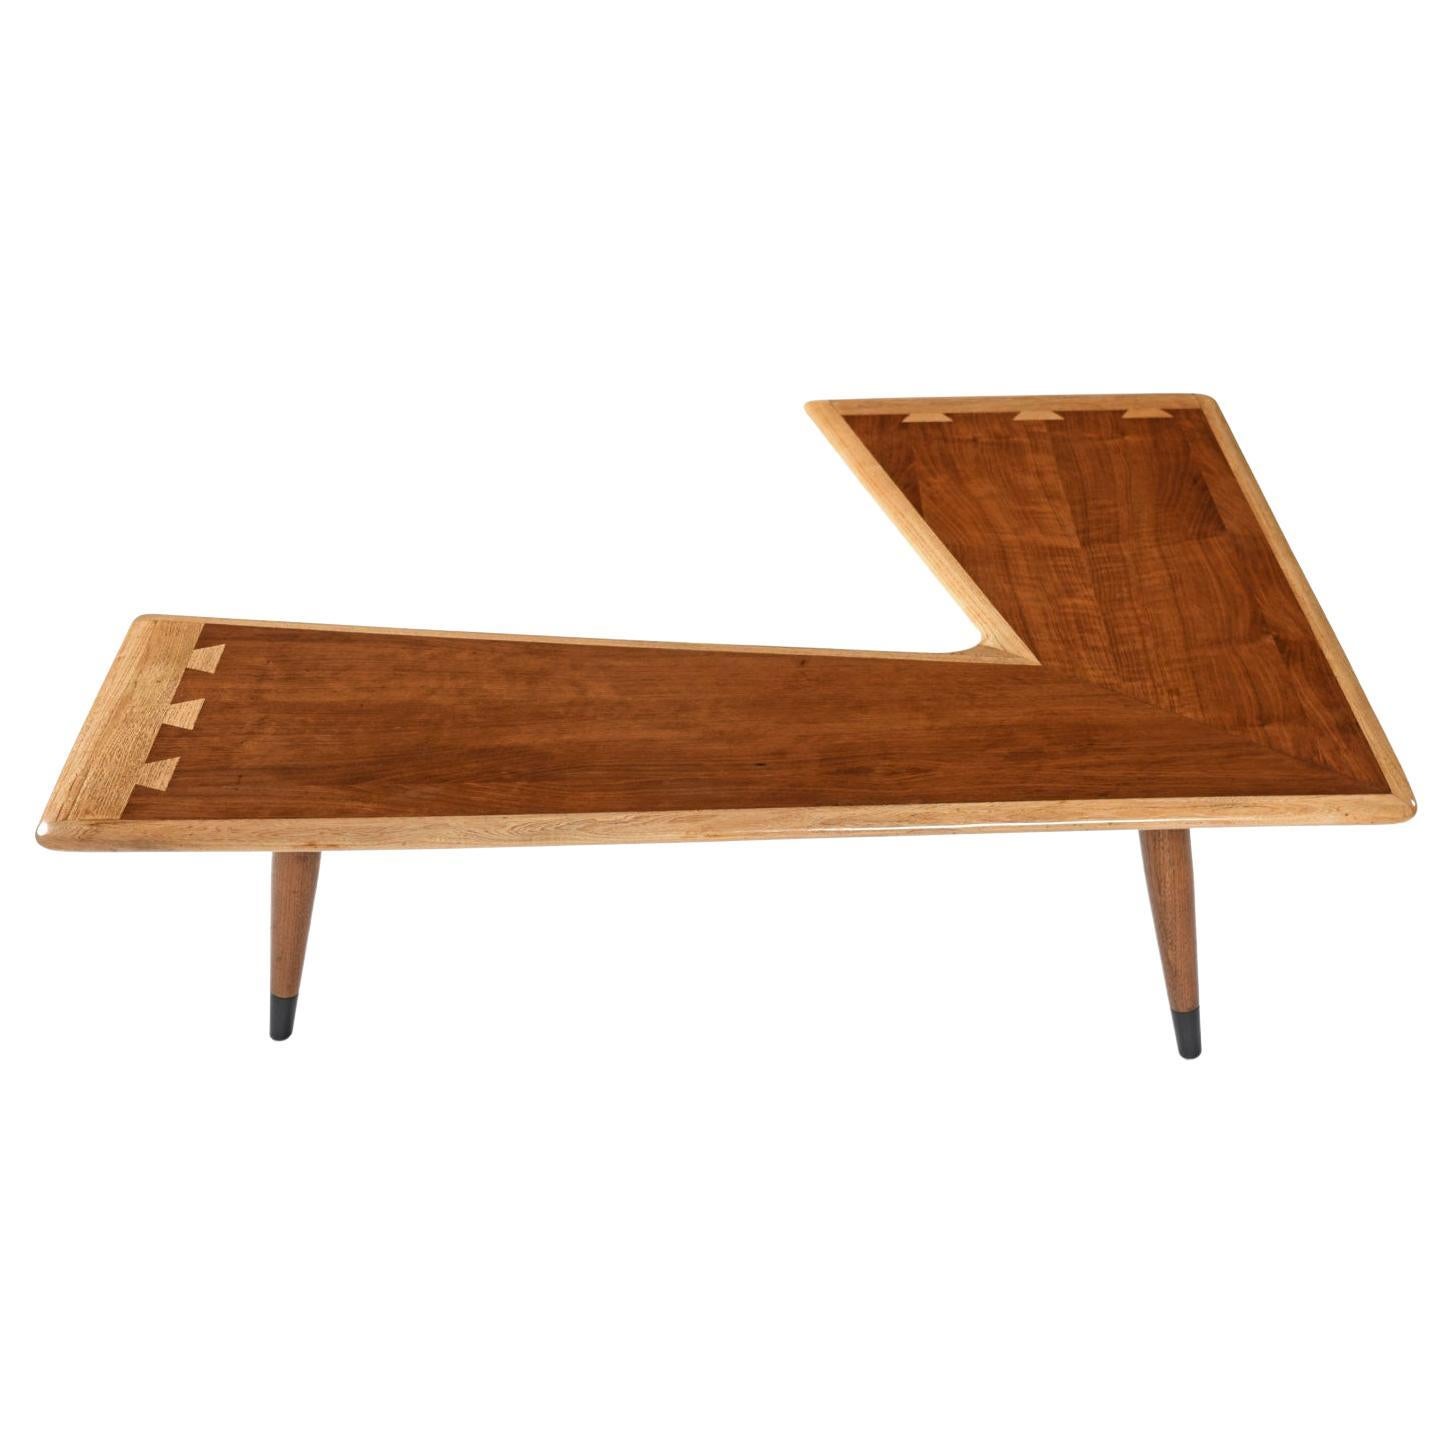 This boomerang coffee table is one of the more illusive and sought after models from the ubiquitous Acclaim line by Lane. The FMV restoration team brought this neglected orphan back to life and the transformation was significant. The loose legs were